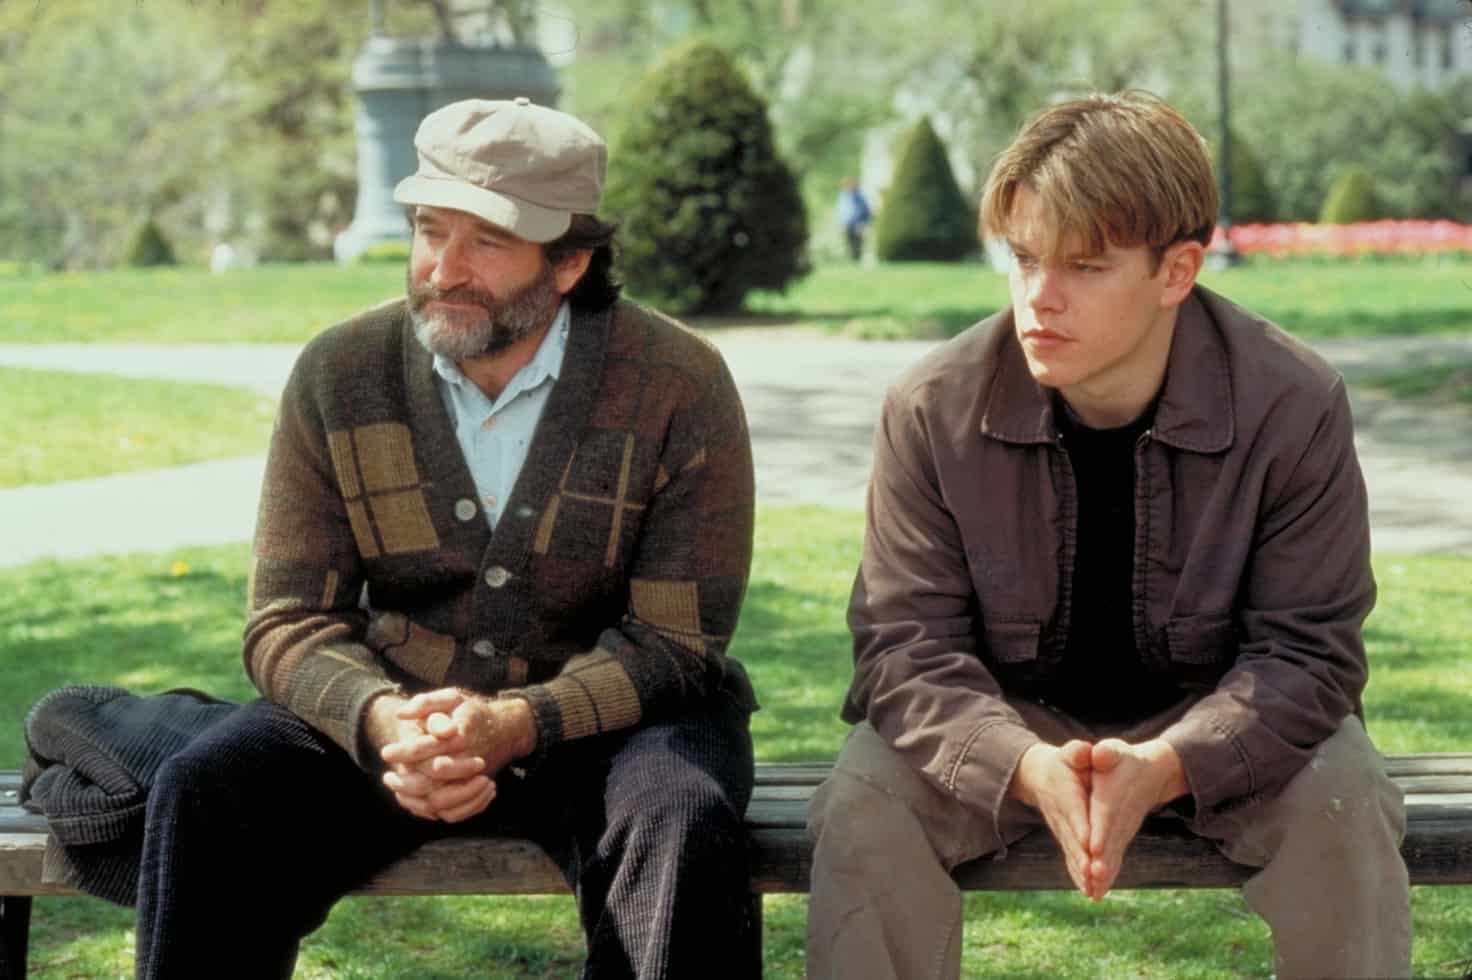 Sean and Will are sitting on a park bench in the movie Good Will Hunting